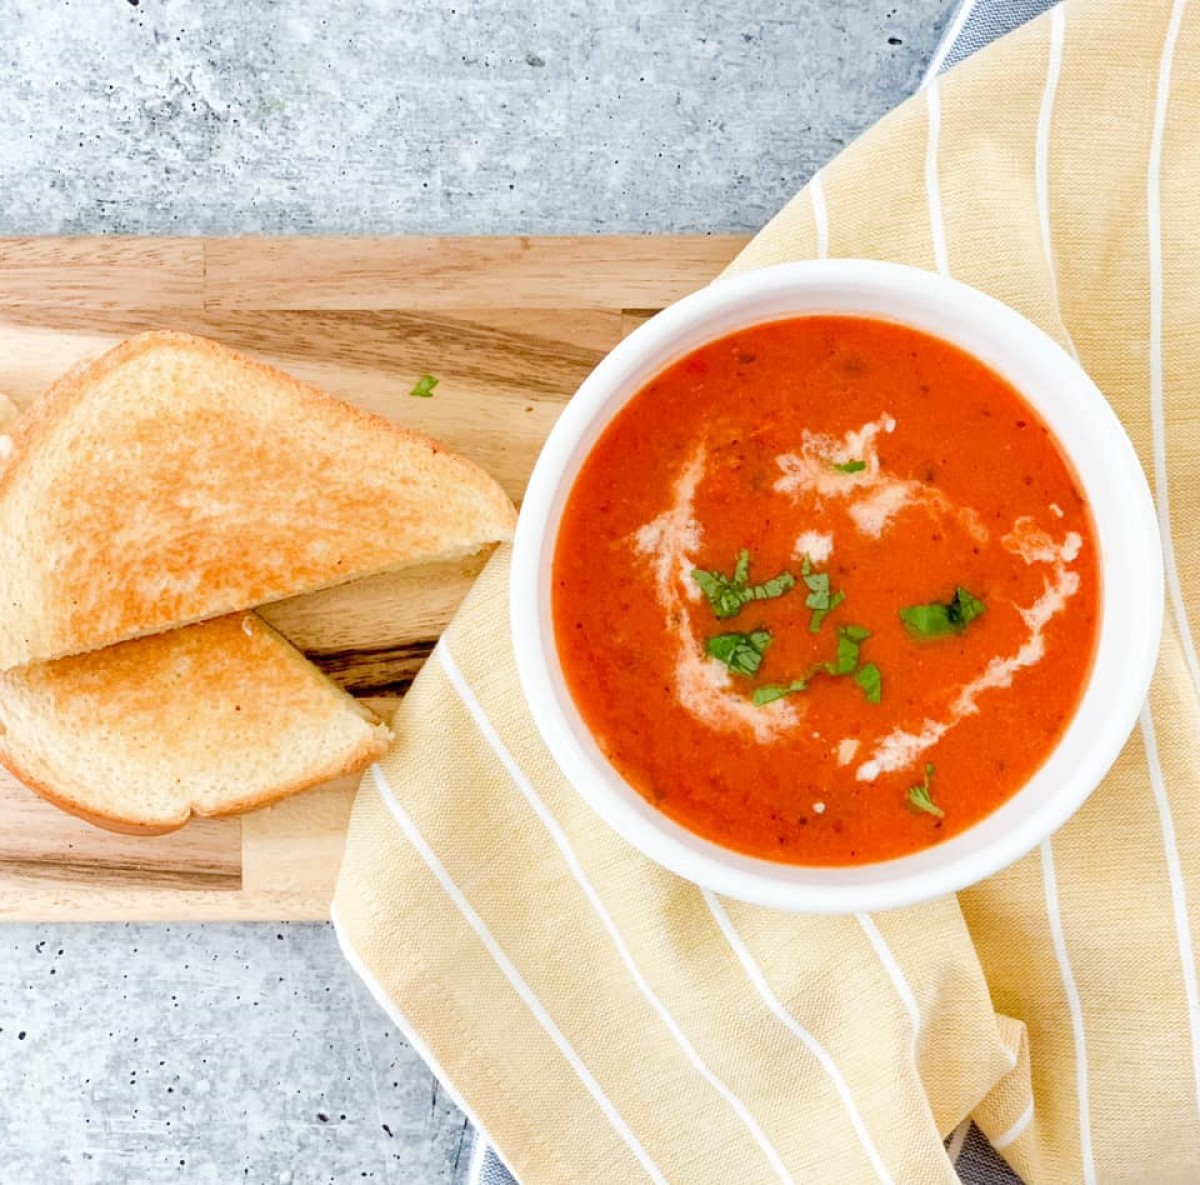 Philips Soupmaker Review, Roasted Tomato Soup & A Giveaway Recipe